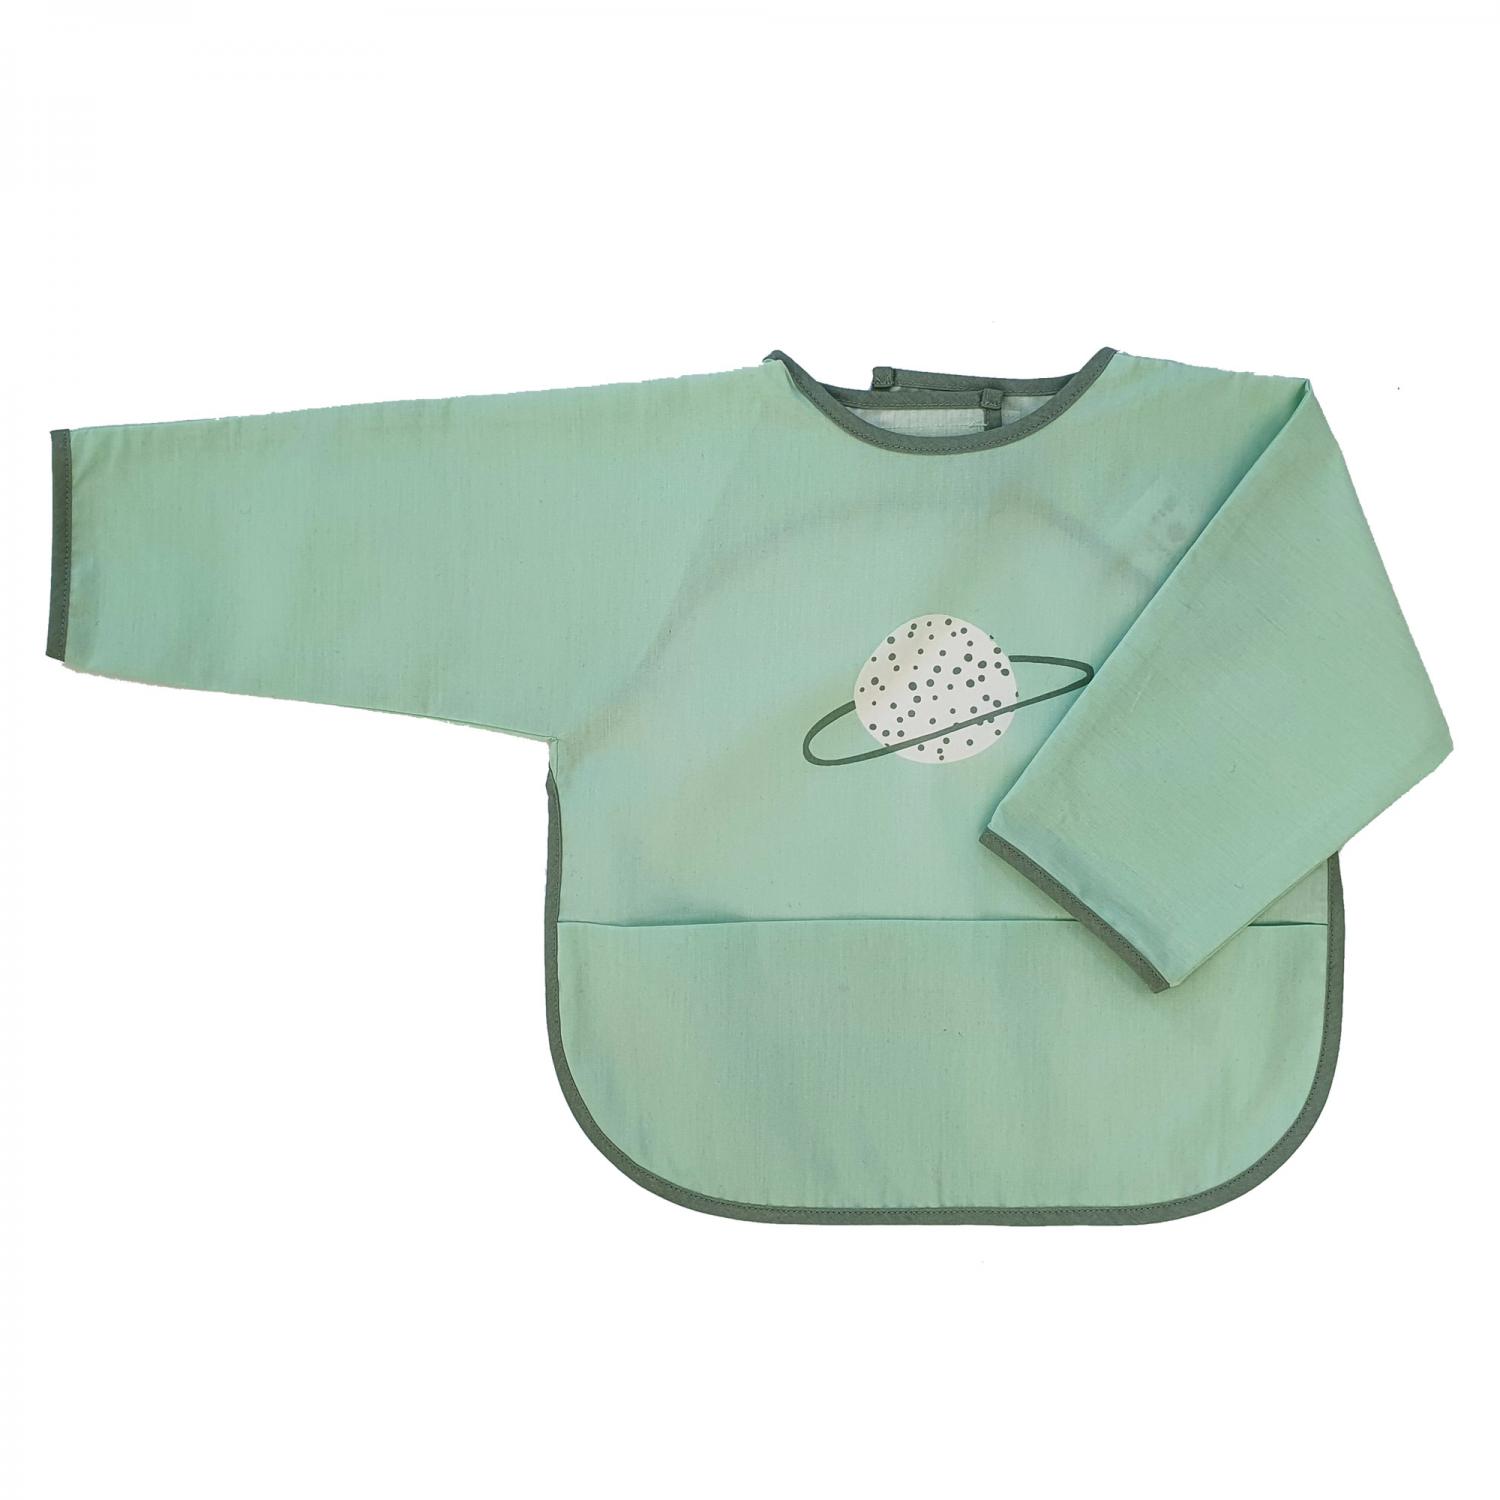 Bib with sleeves green planet